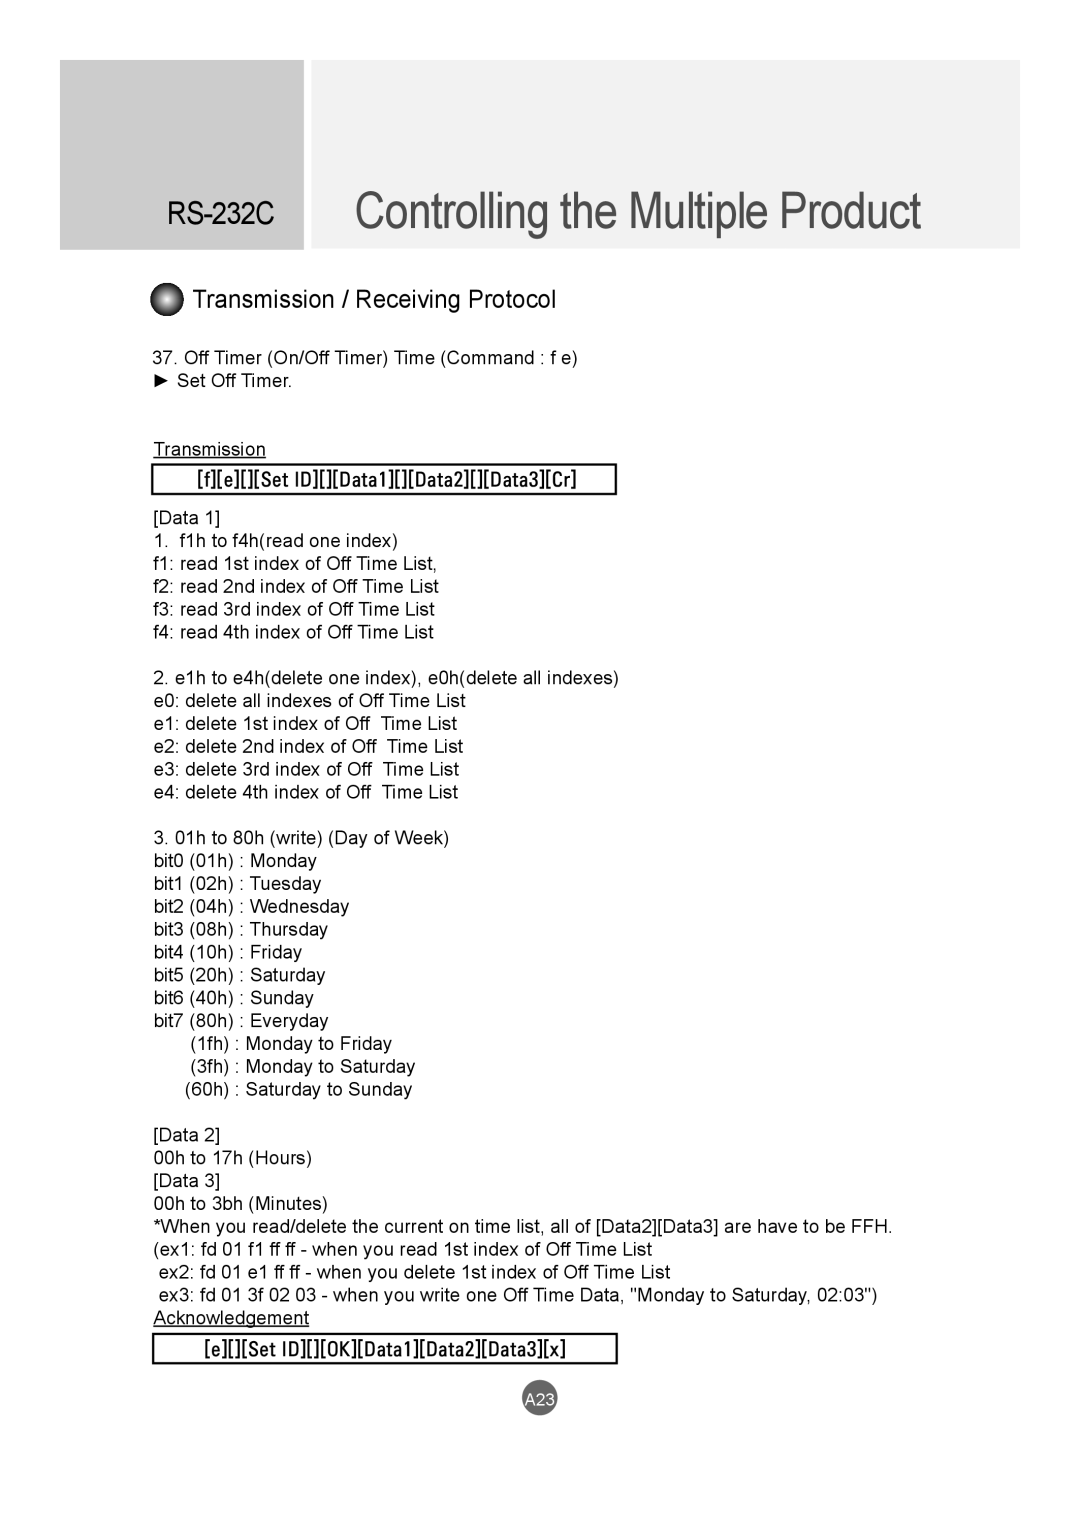 LG Electronics M5520C, M4720C owner manual Controlling the Multiple Product, RS-232C, Transmission / Receiving Protocol 